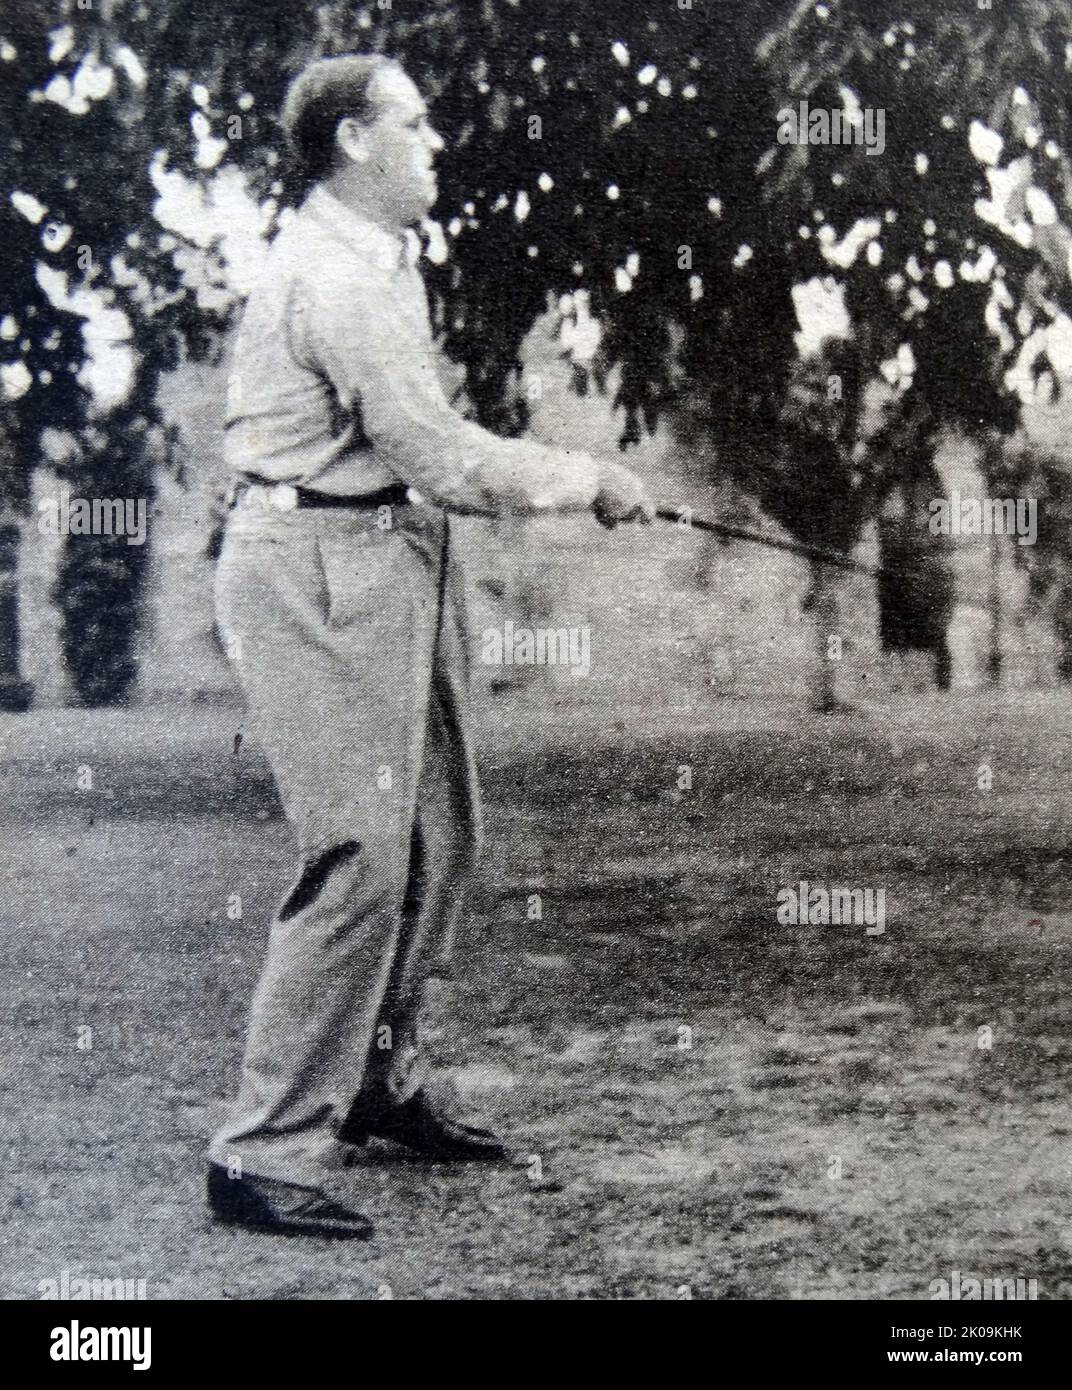 Viceroy of India, Lord Linlithgow playing golf in India. Victor Alexander John Hope, 2nd Marquess of Linlithgow, KG, KT, GCSI, GCIE, OBE, TD, PC, FRSE (24 September 1887 - 5 January 1952) was a British Unionist politician, agriculturalist, and colonial administrator. He served as Governor-General and Viceroy of India from 1936 to 1943. He was usually referred to simply as Linlithgow. Stock Photo